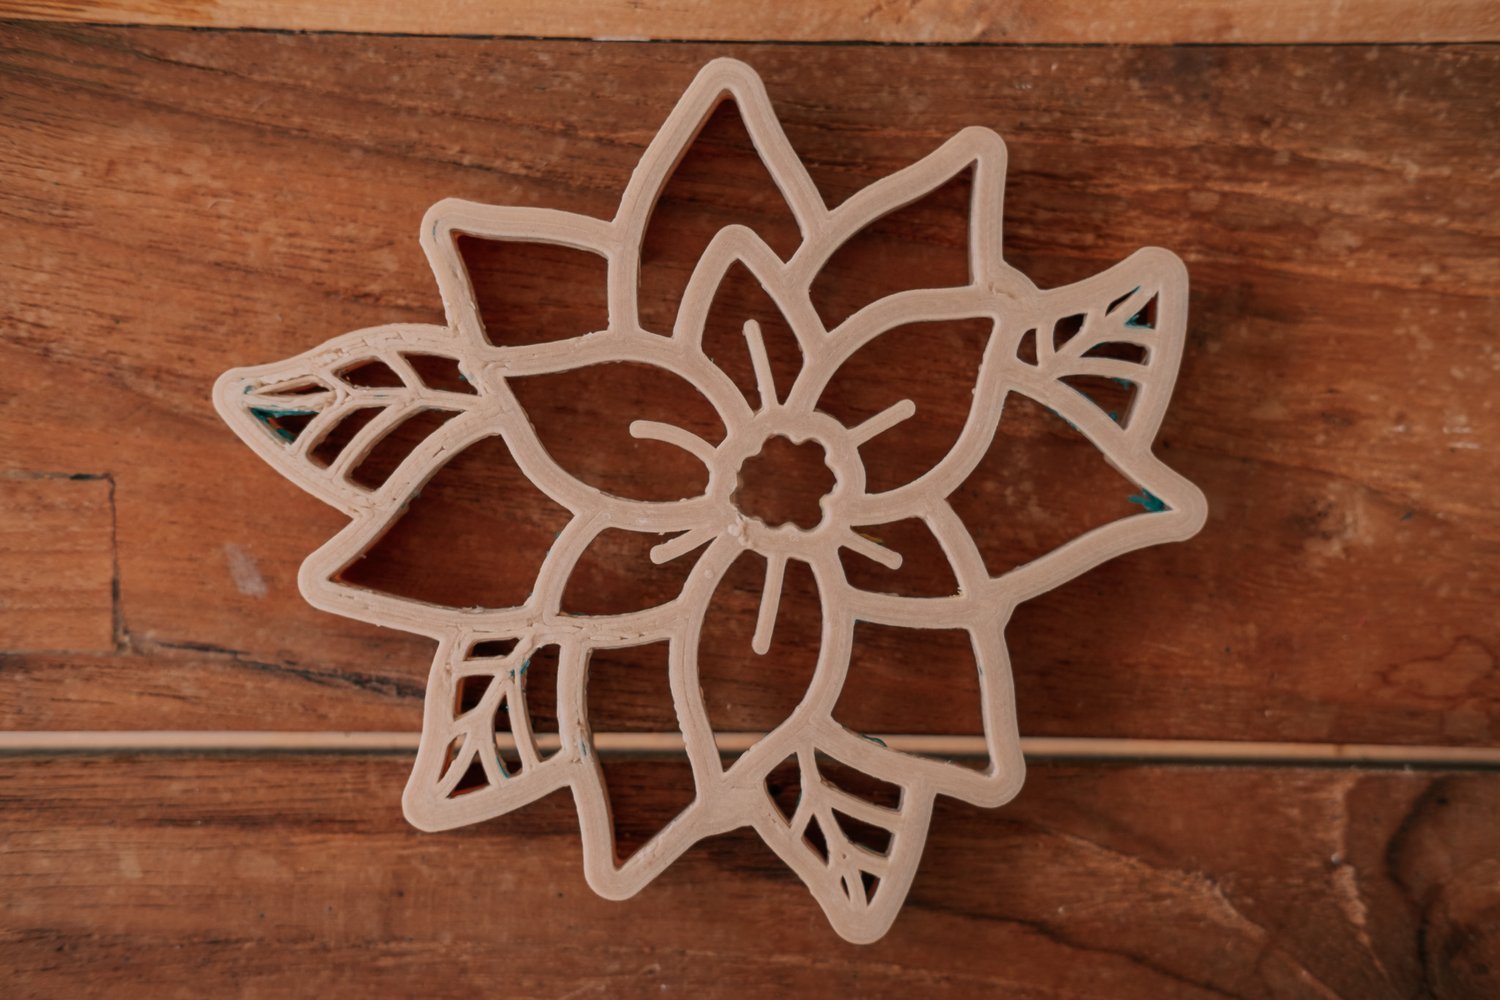 KINFOLK PANTRY | POINSETTA - CHRISTMAS FLOWER ECO CUTTER™ by KINFOLK PANTRY - The Playful Collective